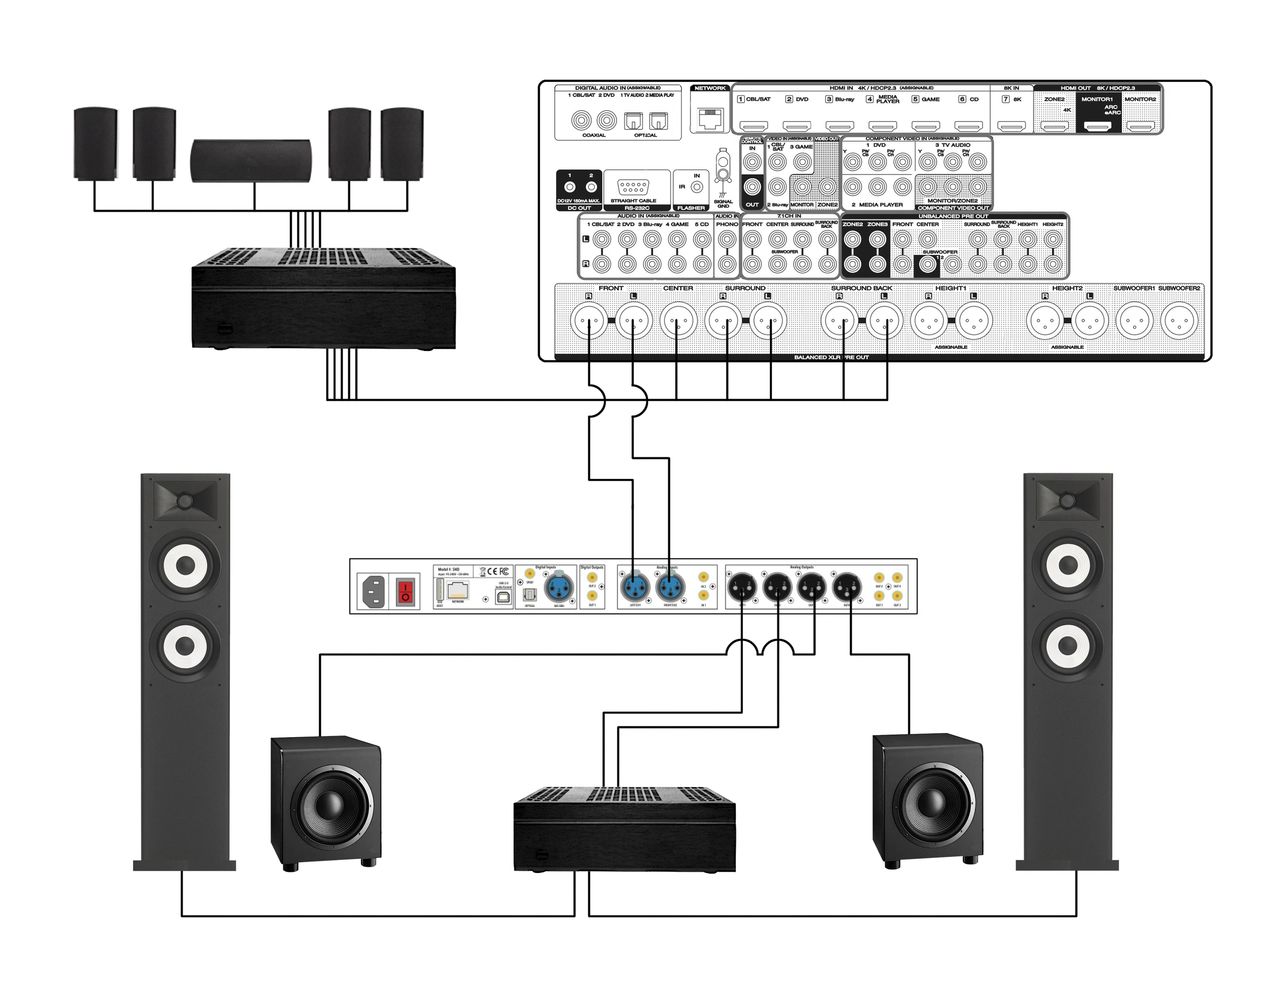 Diagram 1.  High-end hybrid home theater stereo system with AVP, balanced interconnects and external power amplifiers.